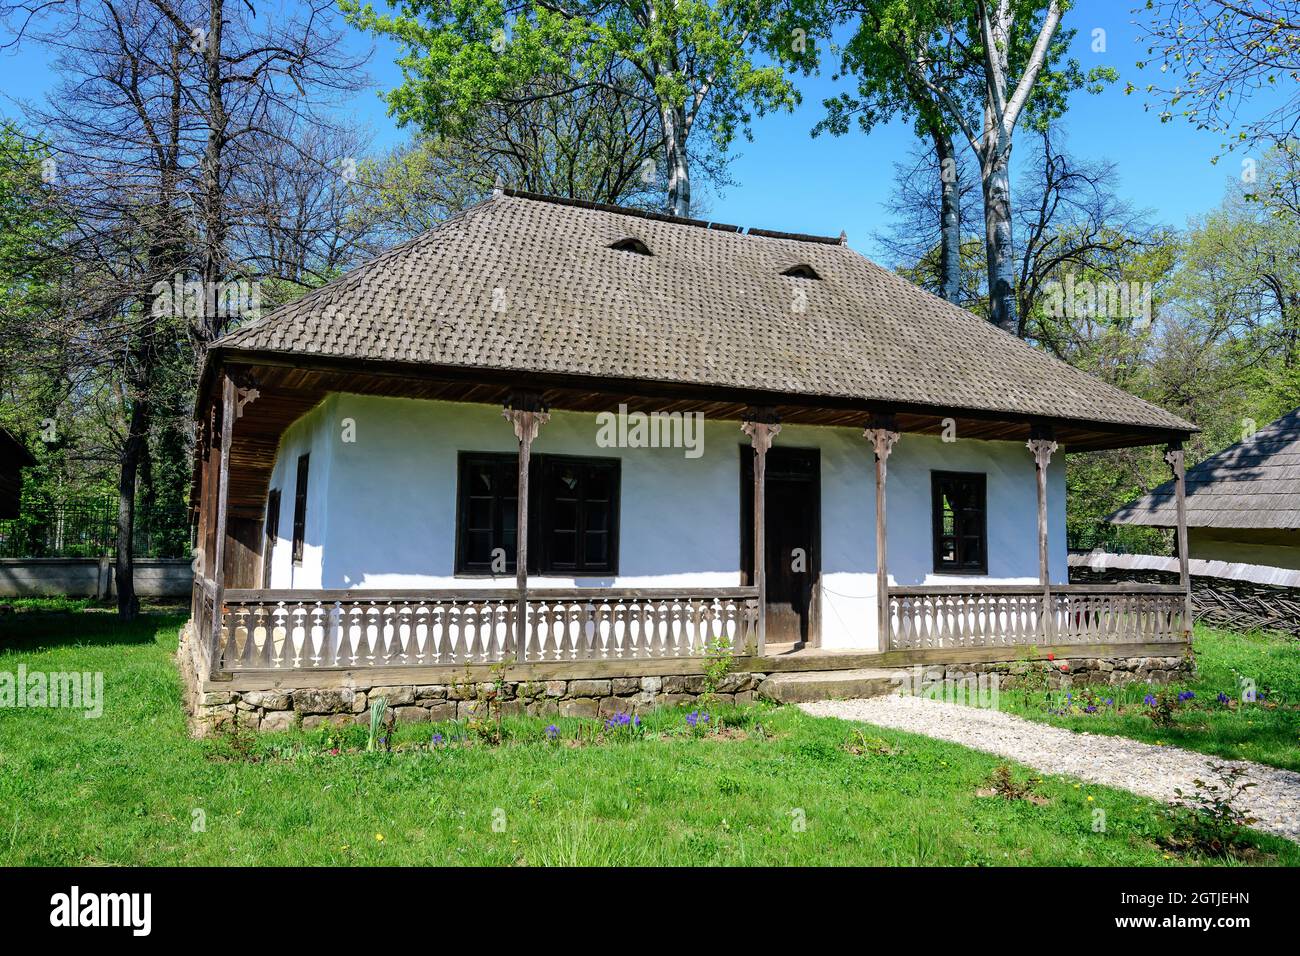 Bucharest, Romania - 25 April 2021: Old traditional Romanian house surounded with many old trees and green grass in Dimitrie Gusti National Village Mu Stock Photo